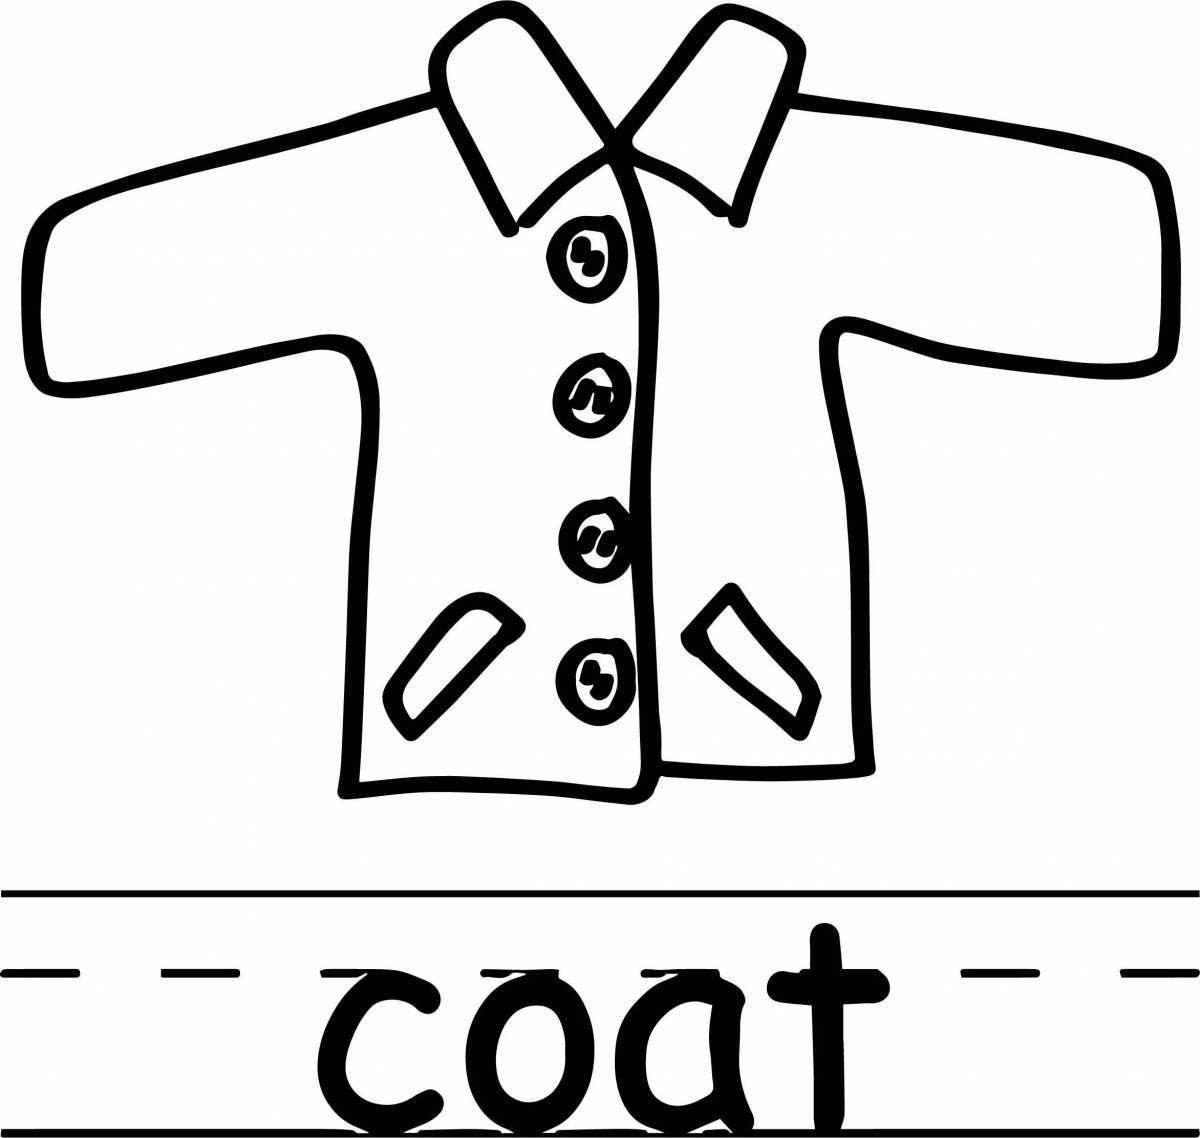 Fabulous coat coloring page for kids